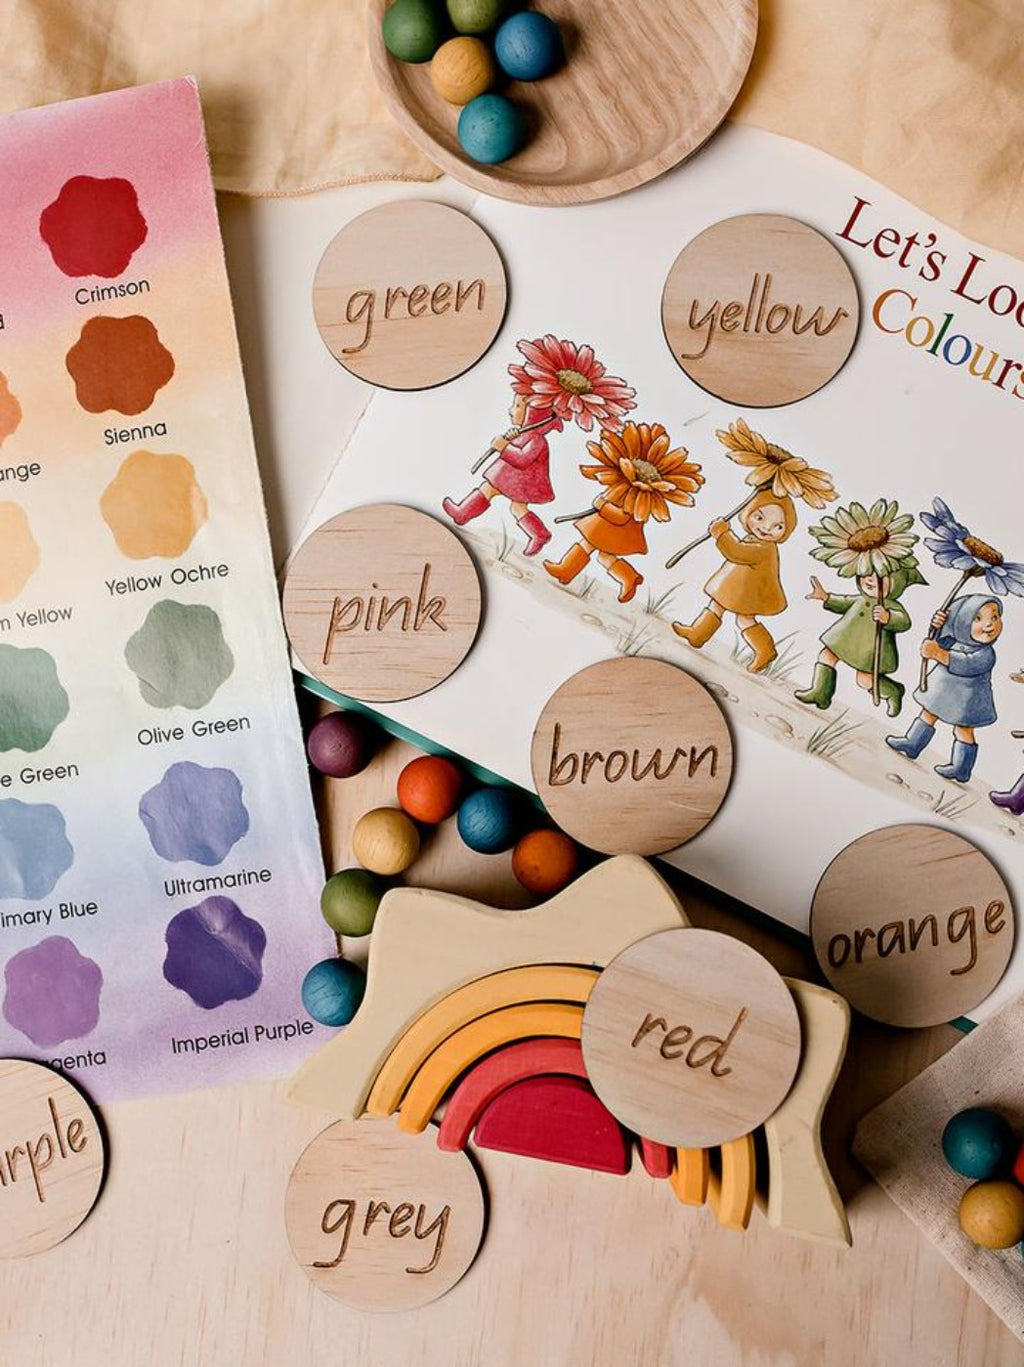 Learn To Read, Recognise & Spell Colours Set - Green, Yellow, Pink, Brown, Orange, Red, Grey, Purple Wooden Discs